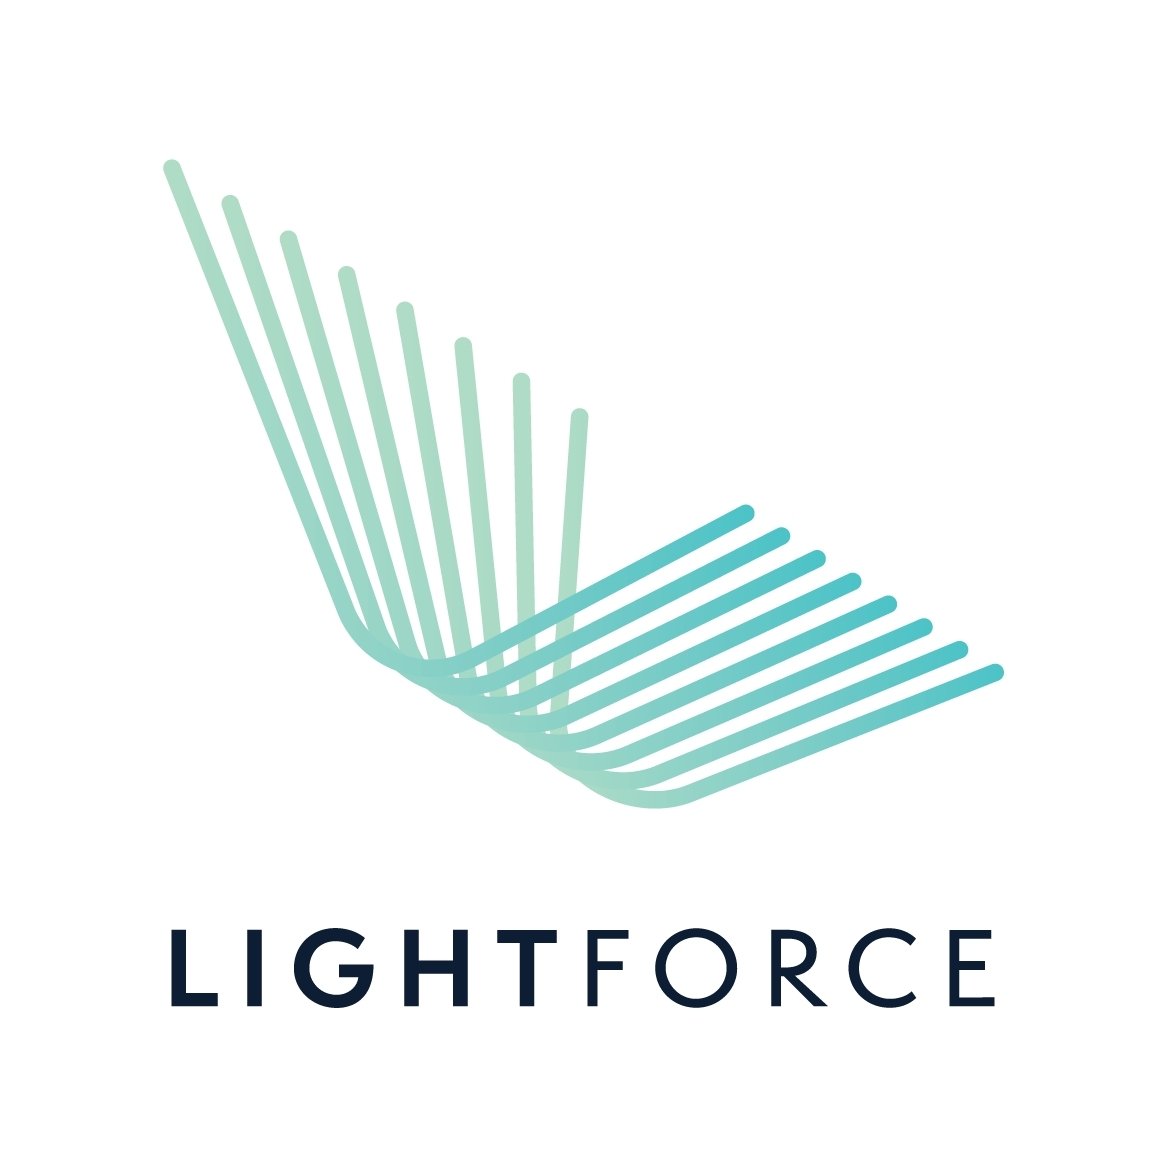 LightForce Orthodontics Closes $14 Million Series B Round Led by Tyche Partners to Bring Customizable 3D-Printed Brackets to Orthodontic Practices and Patients | Business Wire